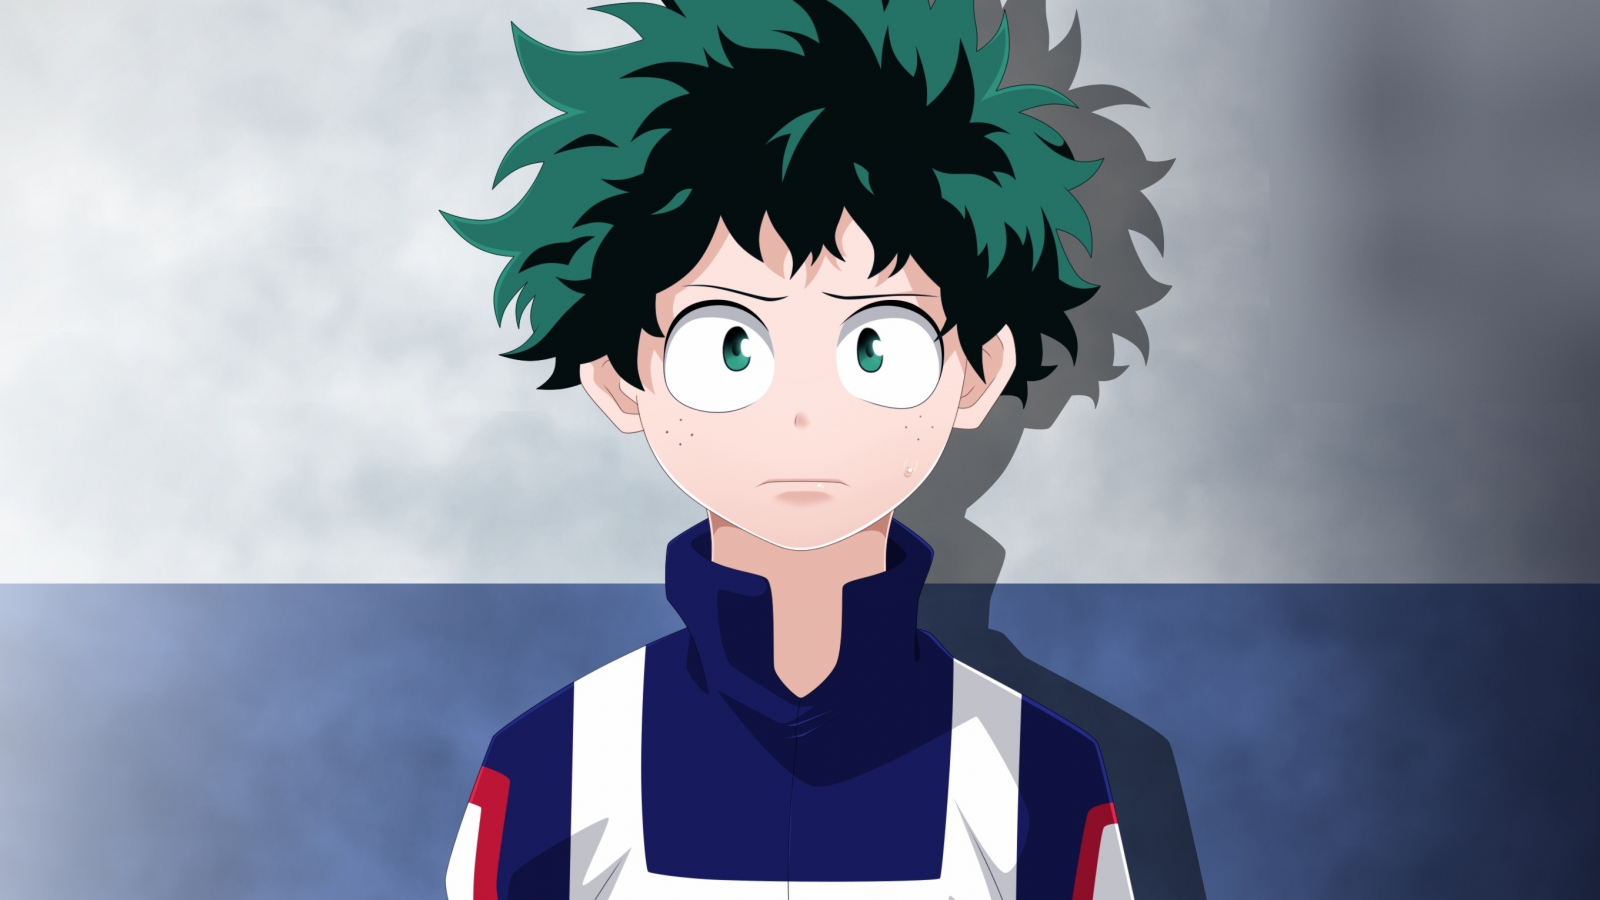 Tiny Hero: Discover the Cute and Brave Style of Young Izuku Midoriya in  this Illustration | Cute anime guys, Anime child, Cute anime character